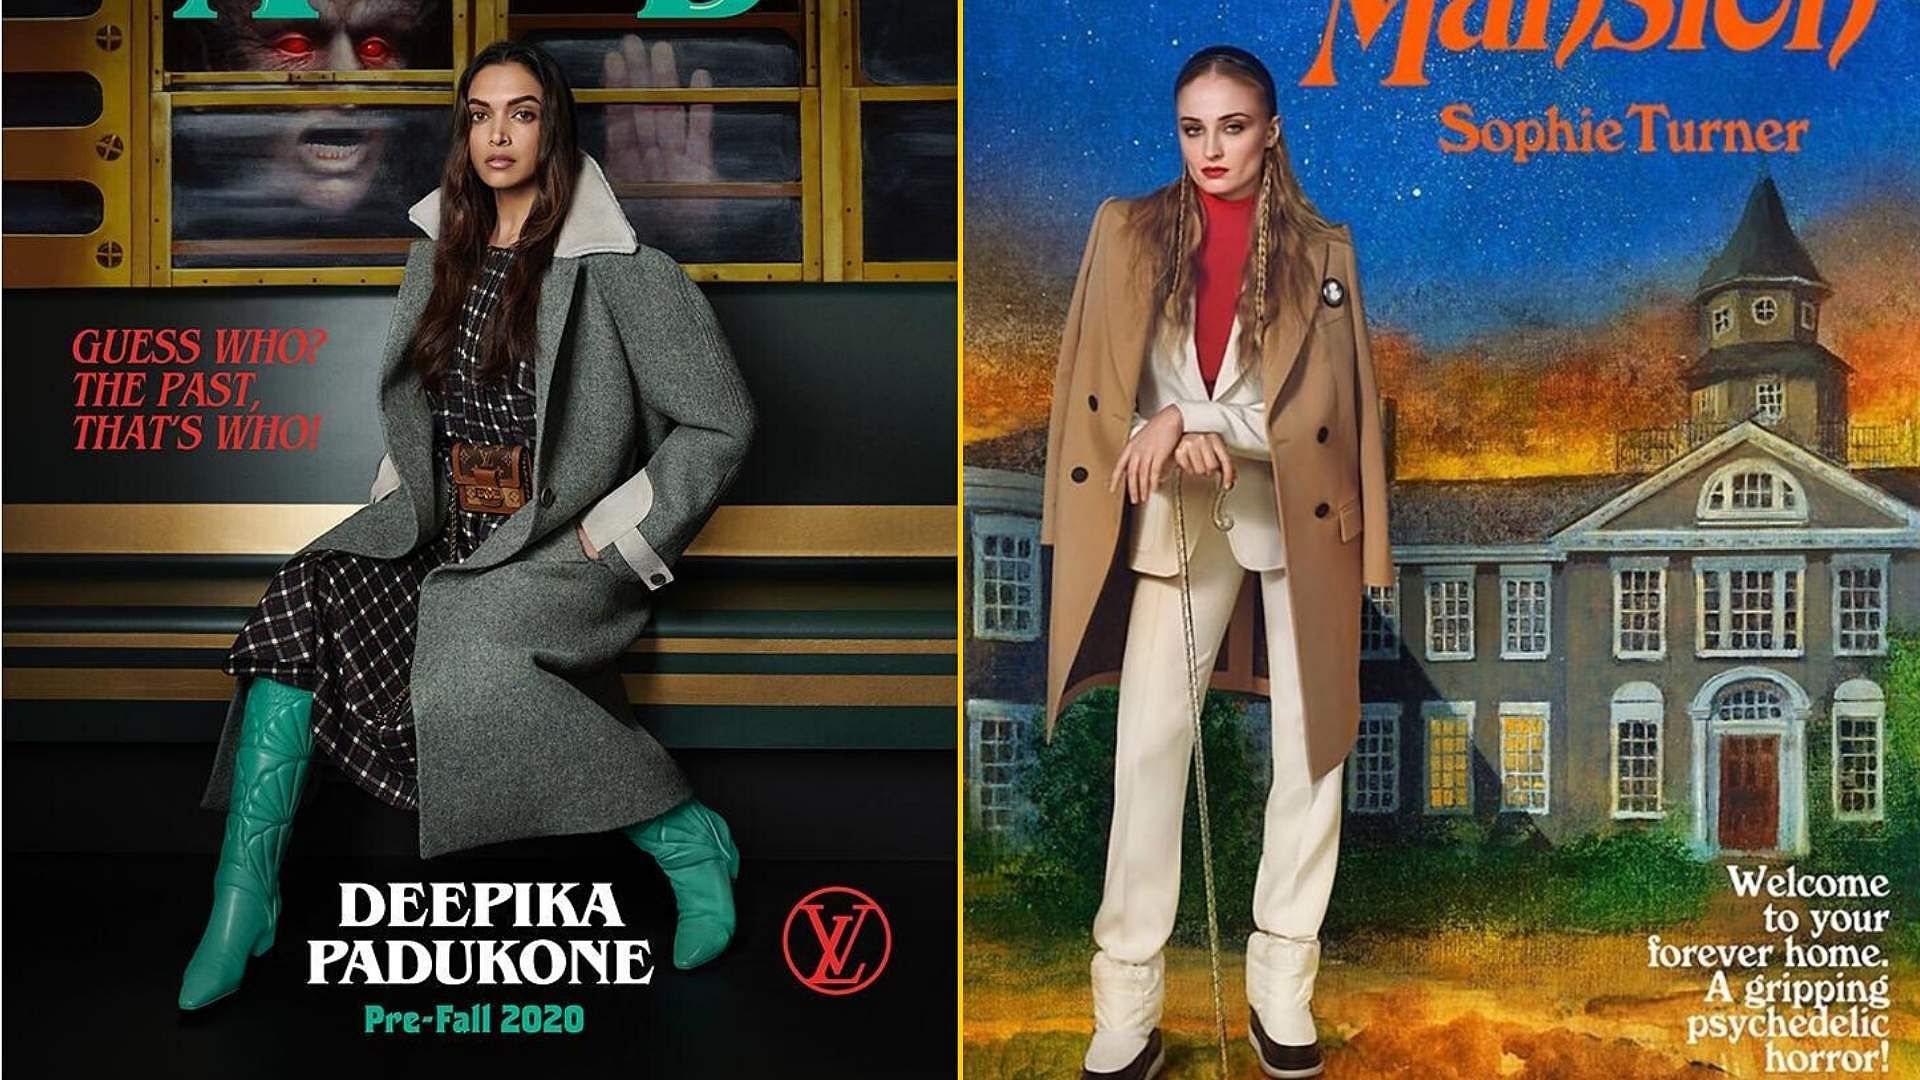 Deepika Padukone and Sophie Turner in Louis Vuitton’s pre-fall 2020 campaign.